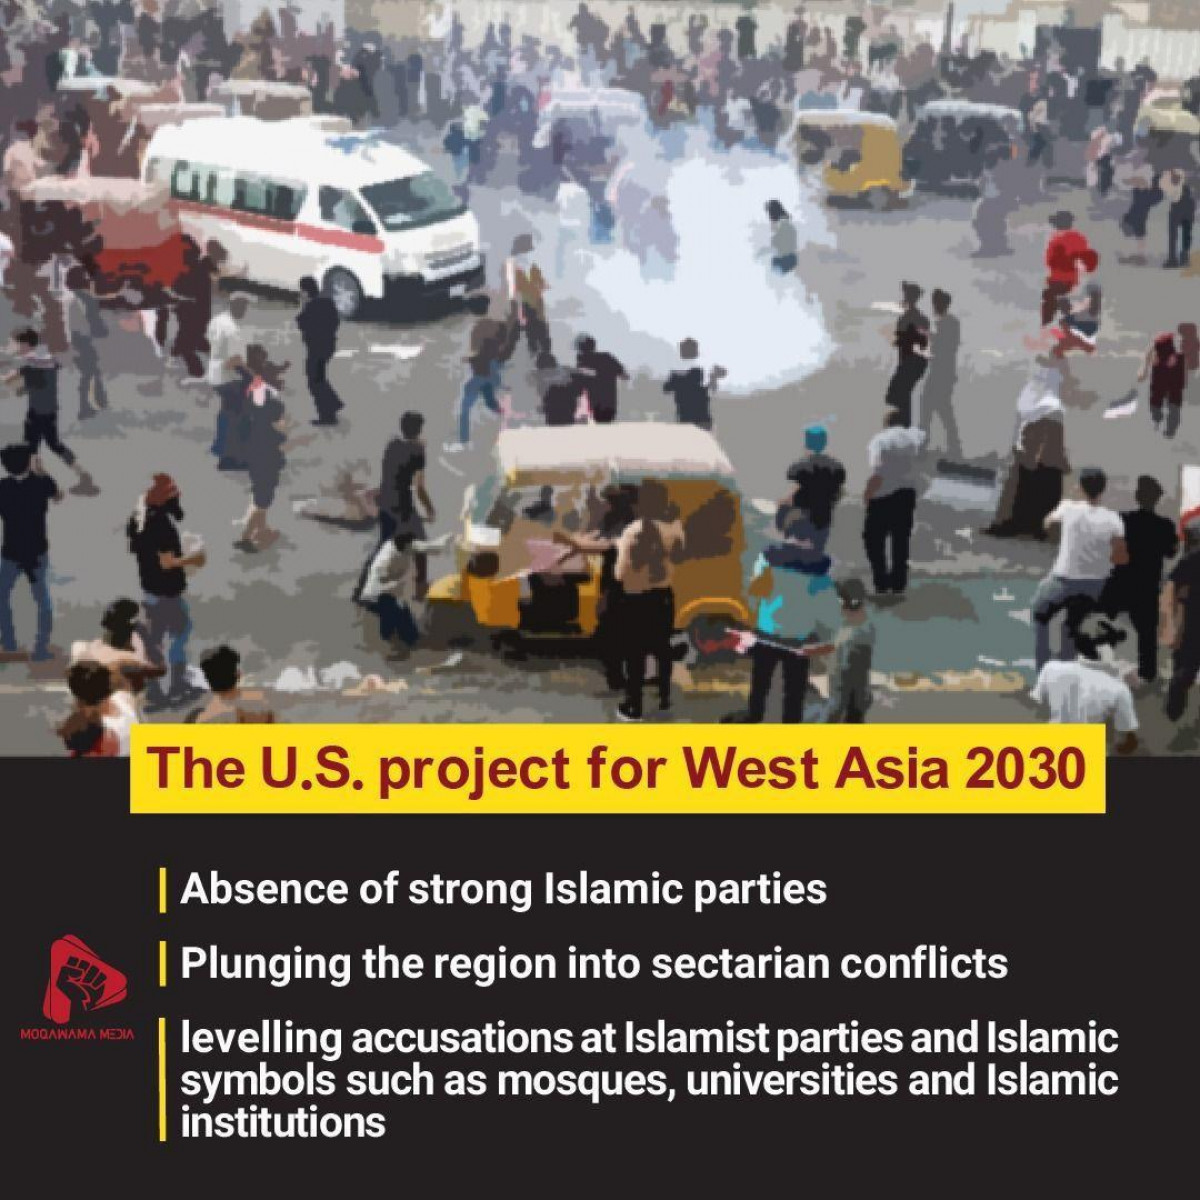 The U.S. project for West Asia